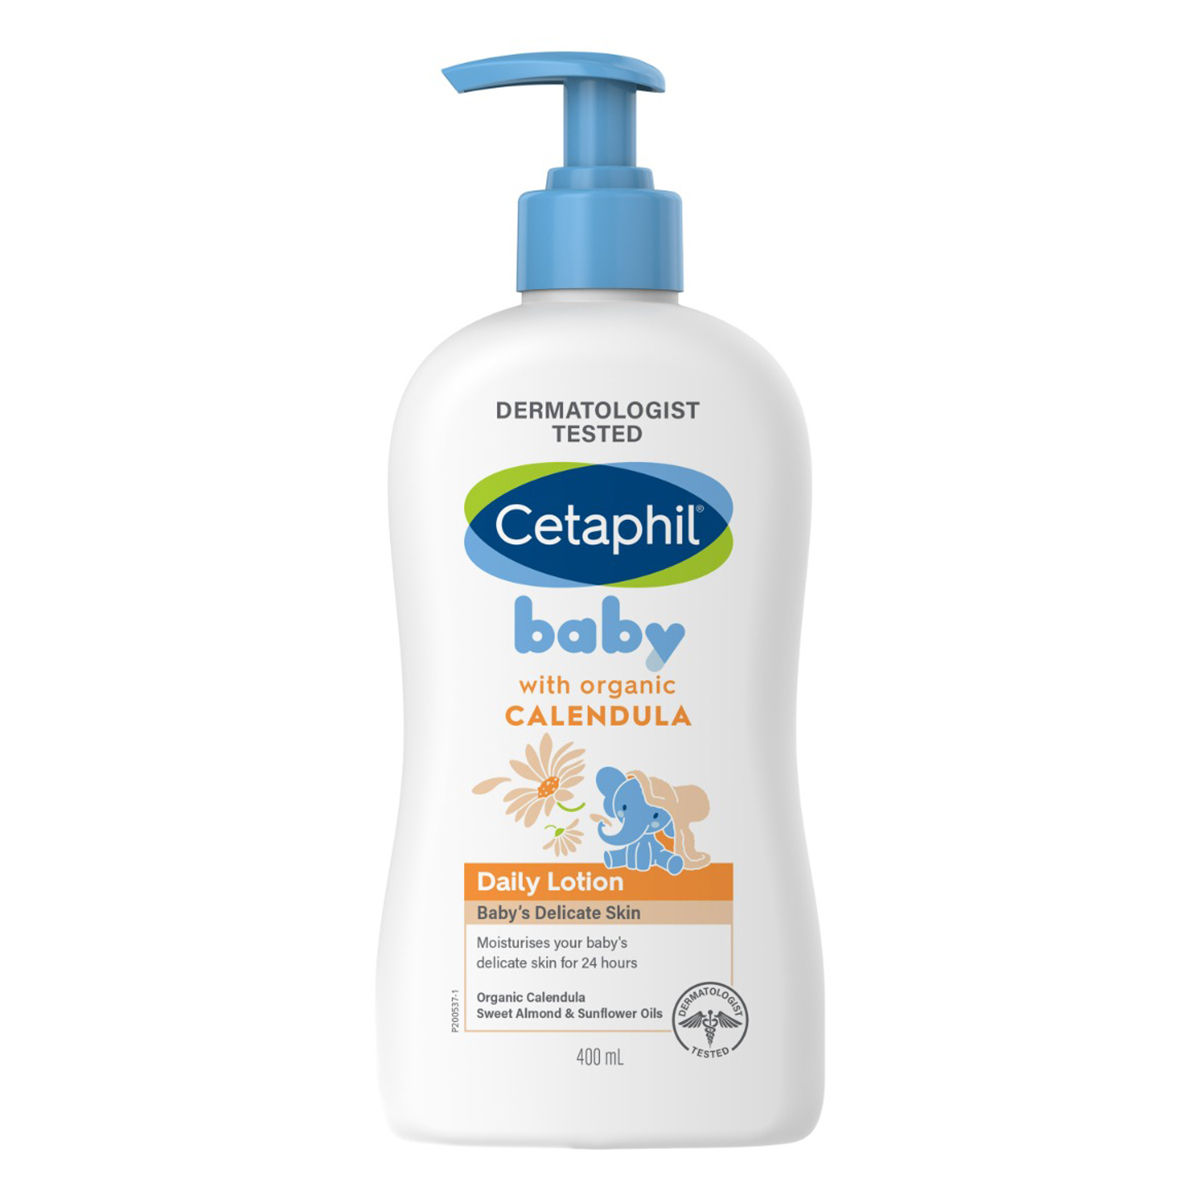 Buy Cetaphil Baby Daily Lotion with Organic Calendula, 400 ml Online